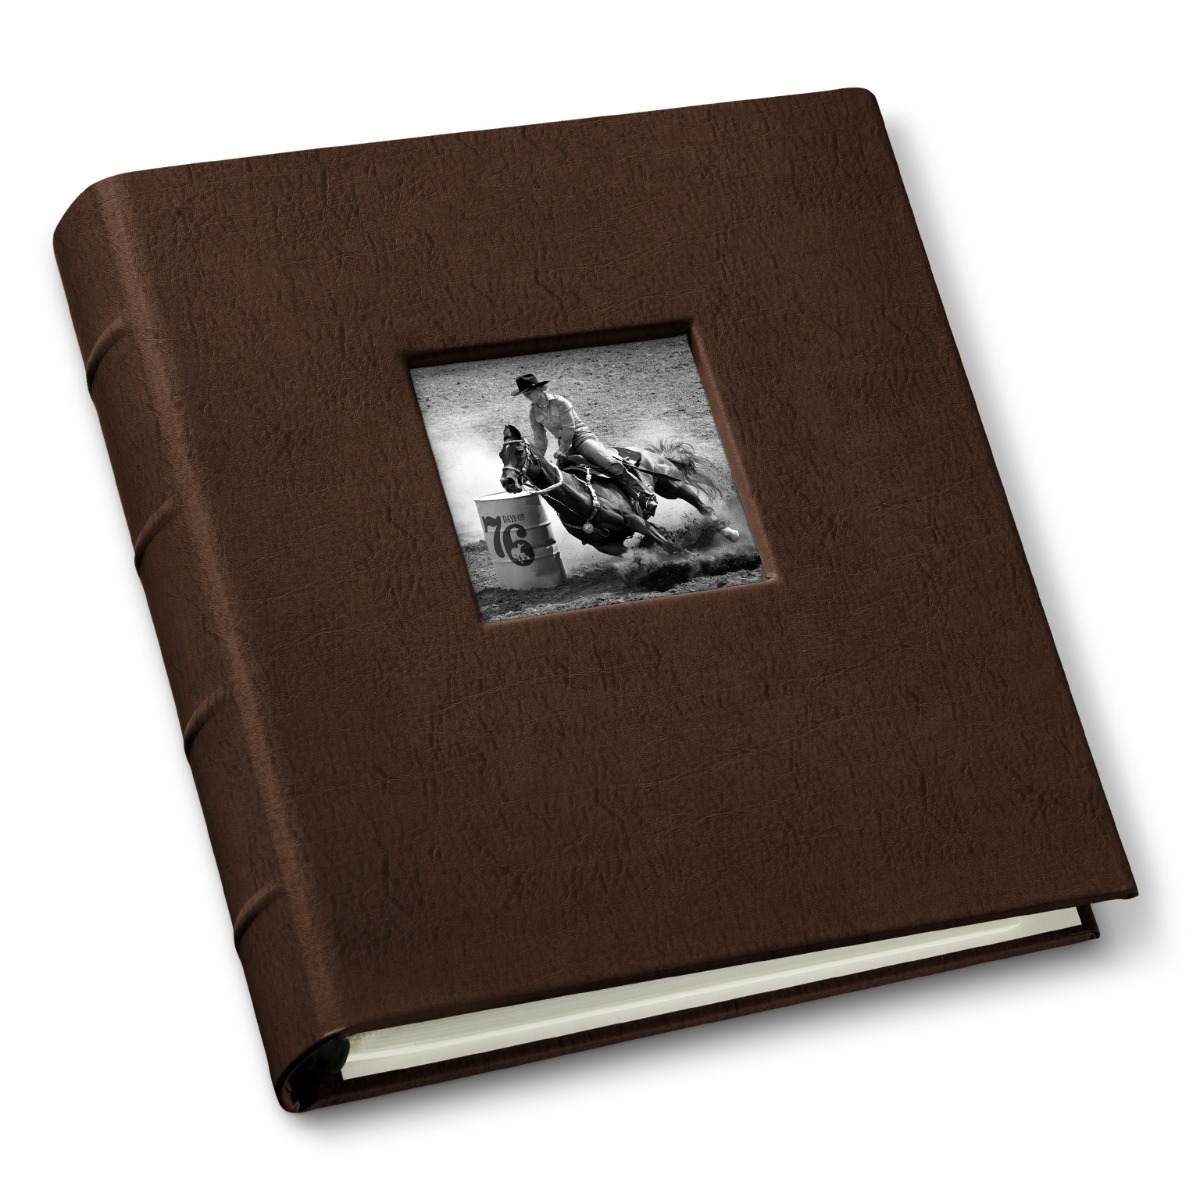 Handmade Leather Photo Albums & Guest Books